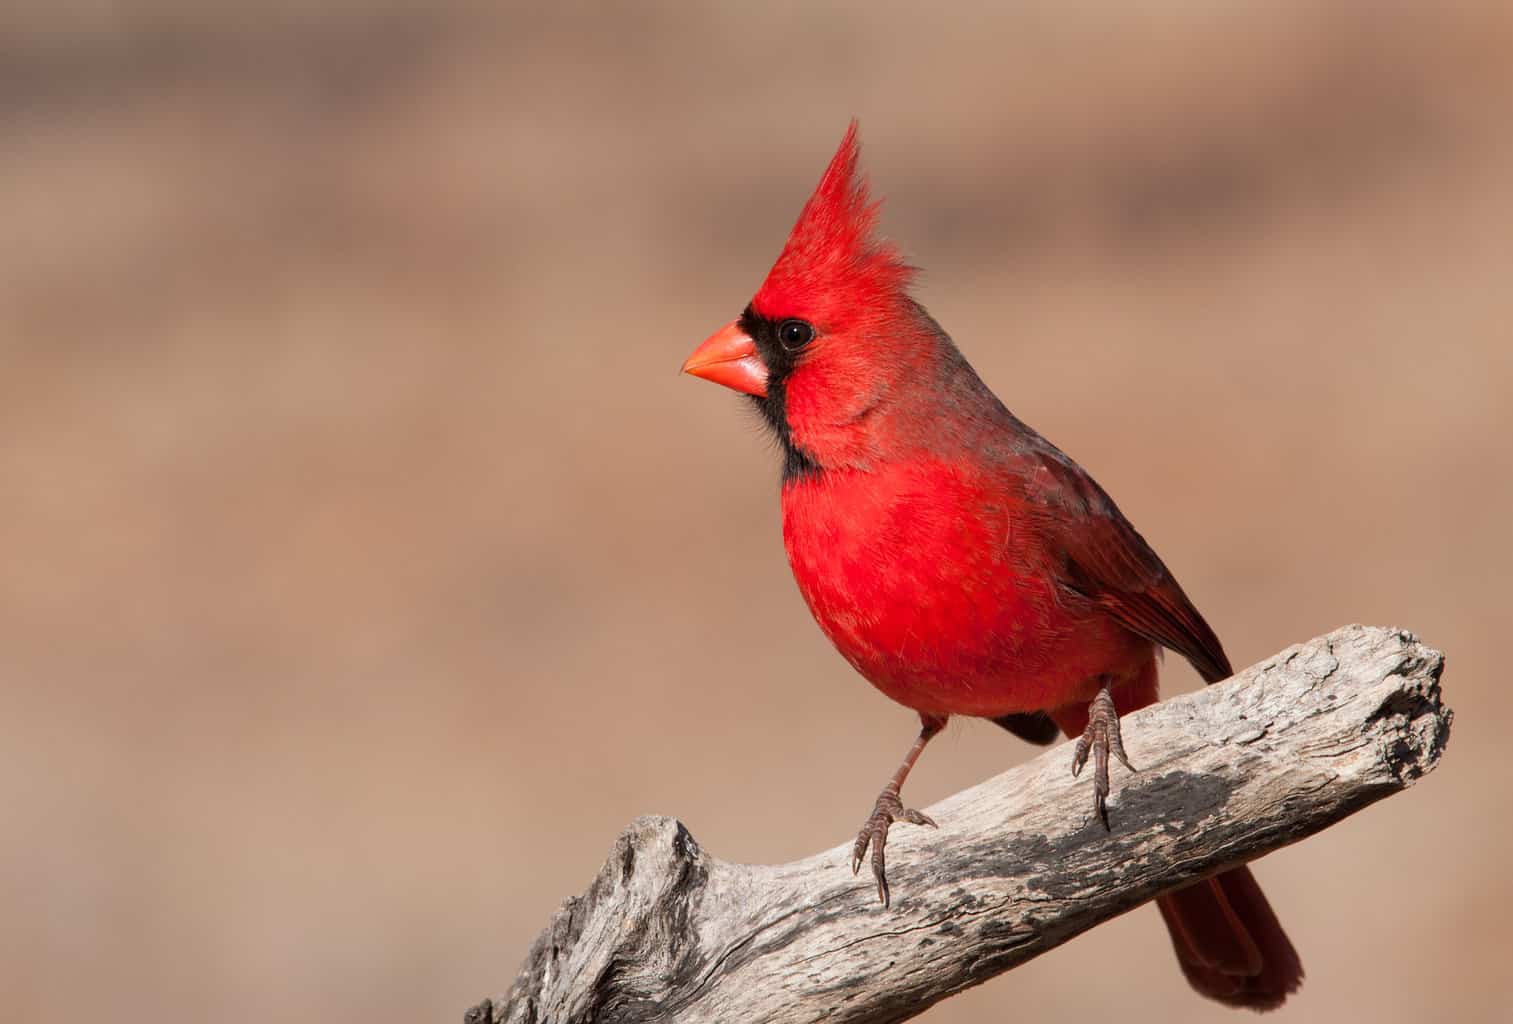 Red Robin vs Cardinal: Yes, There's a Difference!